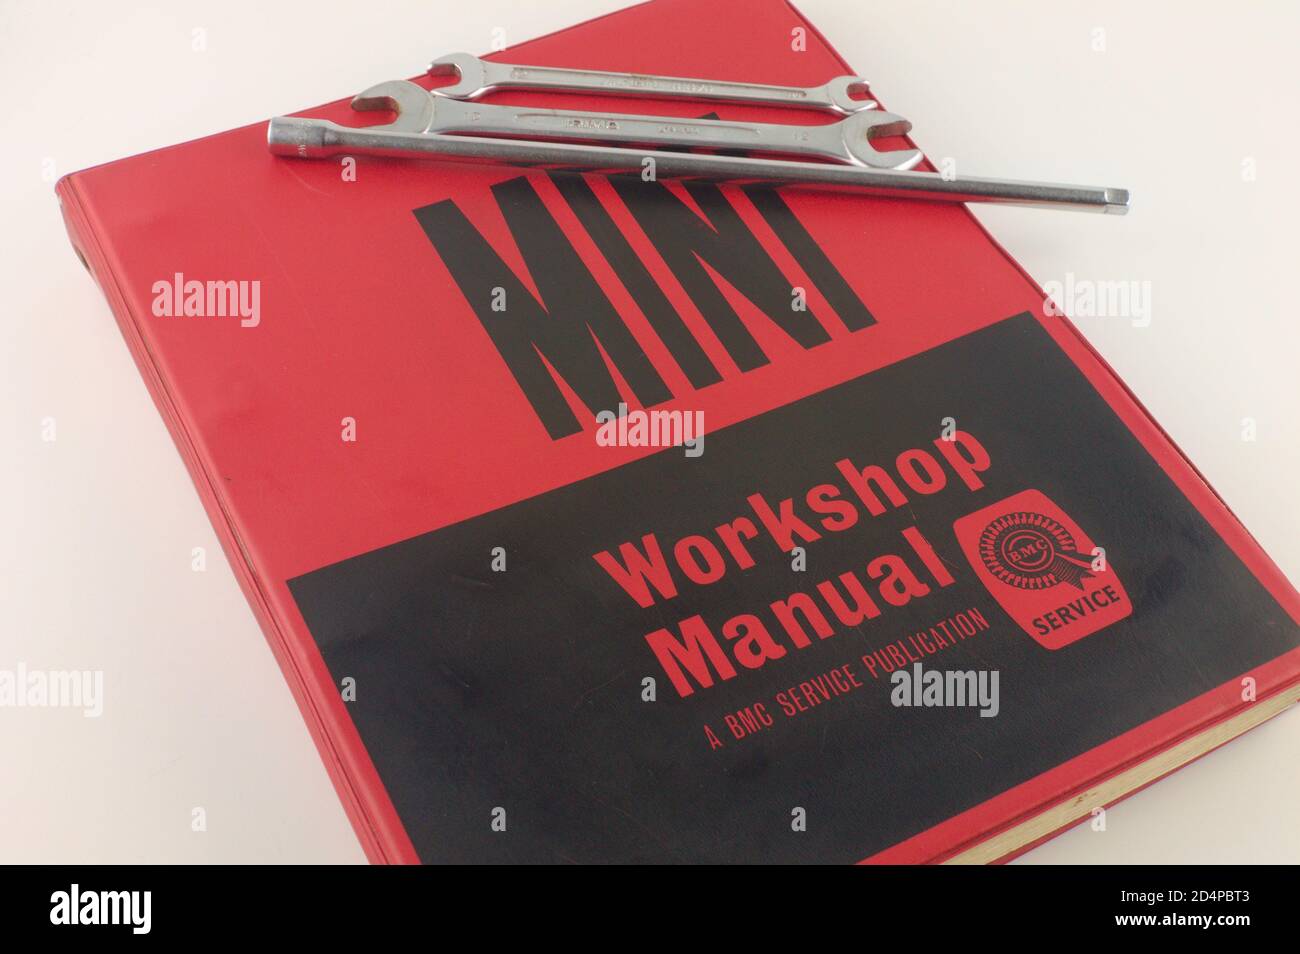 Vintage red and black Mini official work shop manual, BMC service manual with spanners isolated on white background Stock Photo